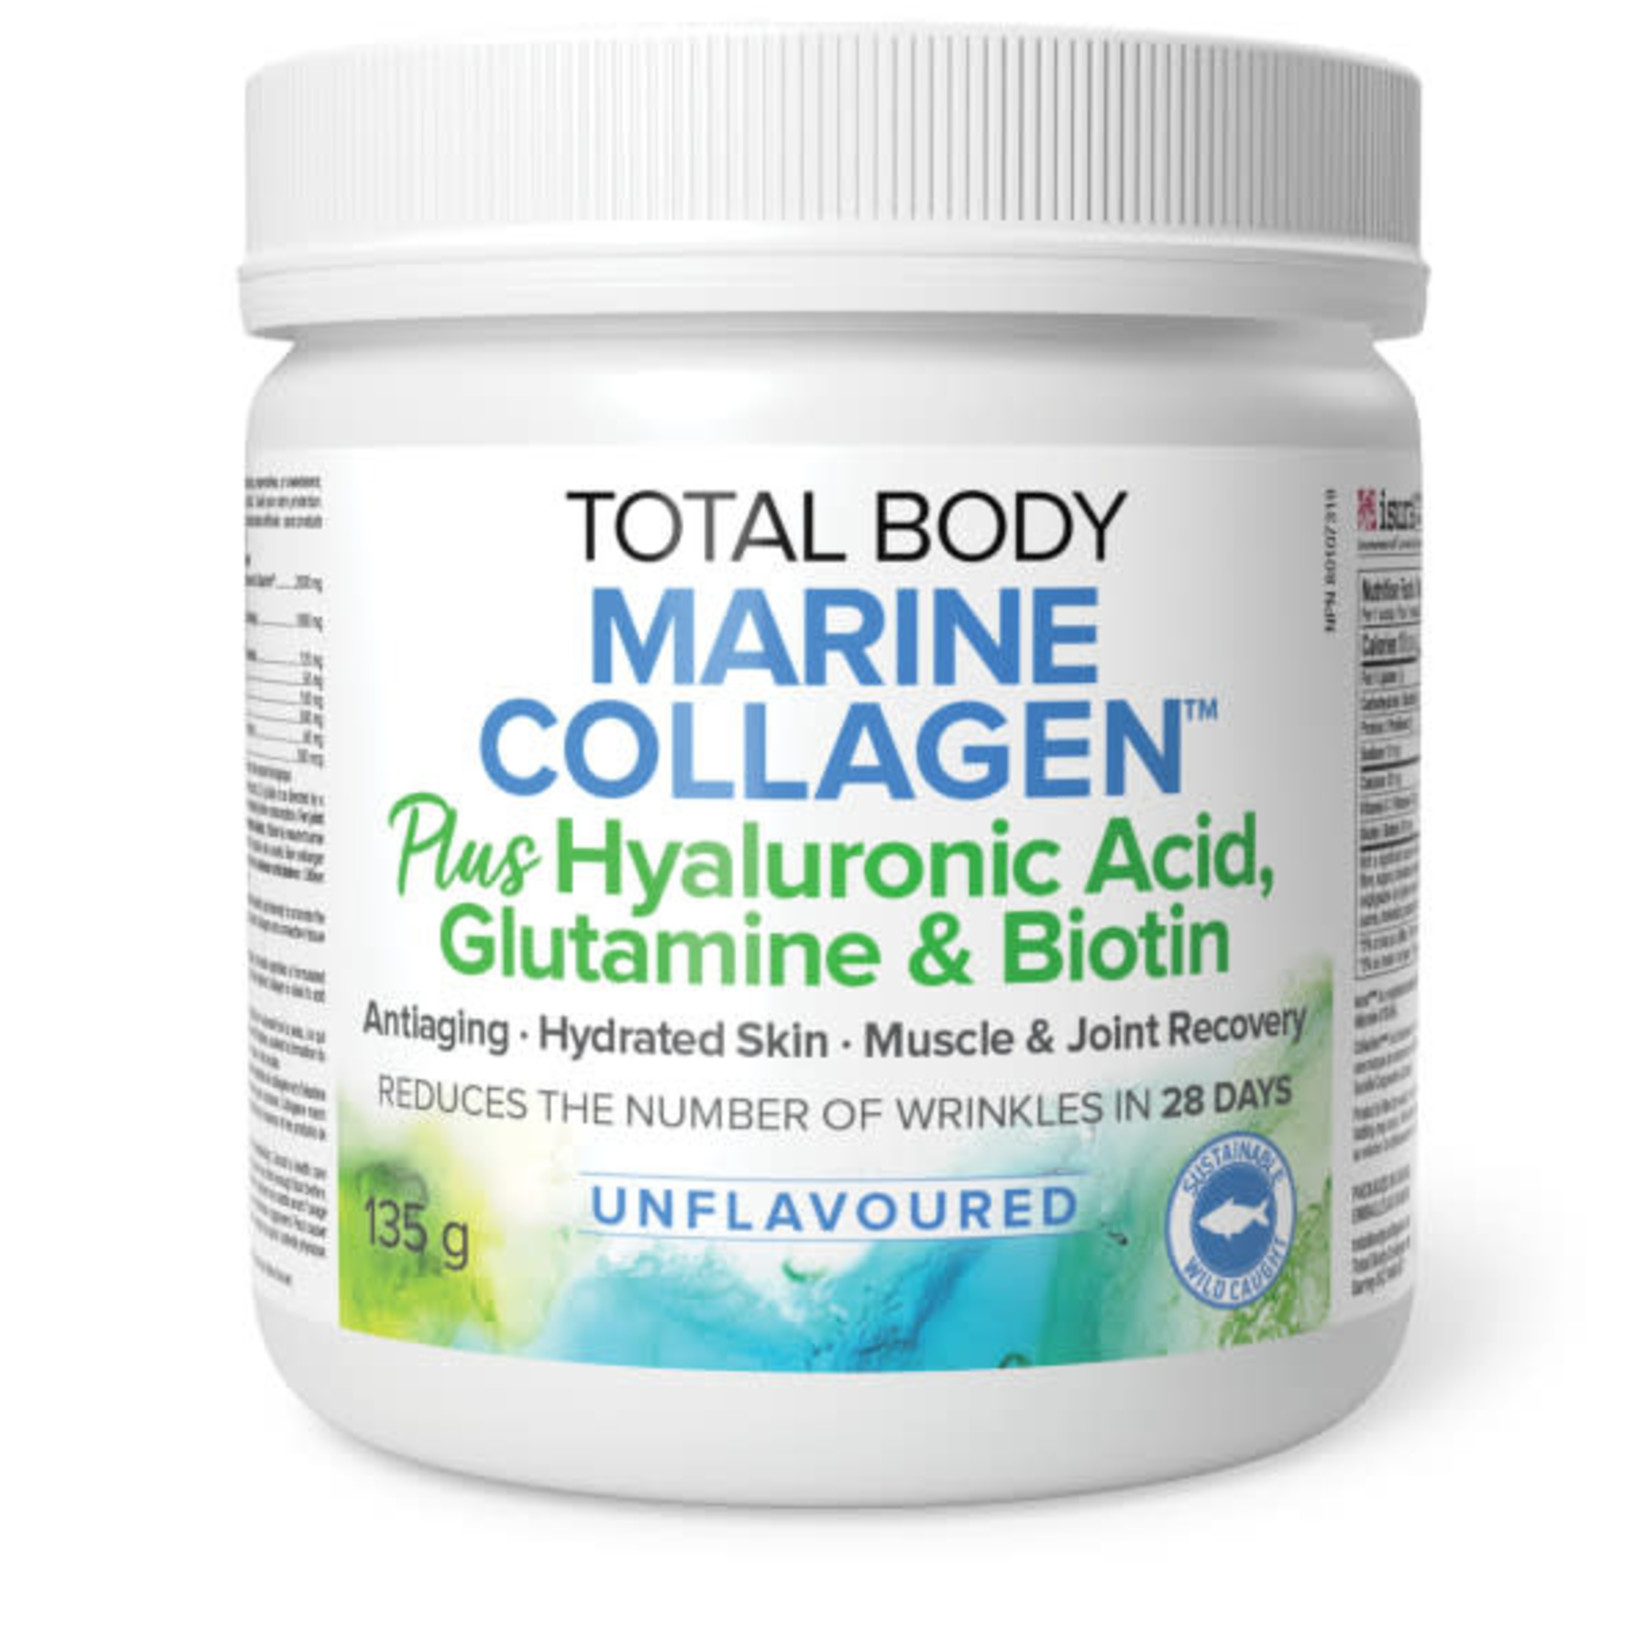 NATURAL FACTORS NATURAL FACTORS TOTAL BODY MARINE COLLAGEN WITH HYALURONIC ACID GLUTAMINE AND BIOTIN UNFLAVOURED 135G POWDER